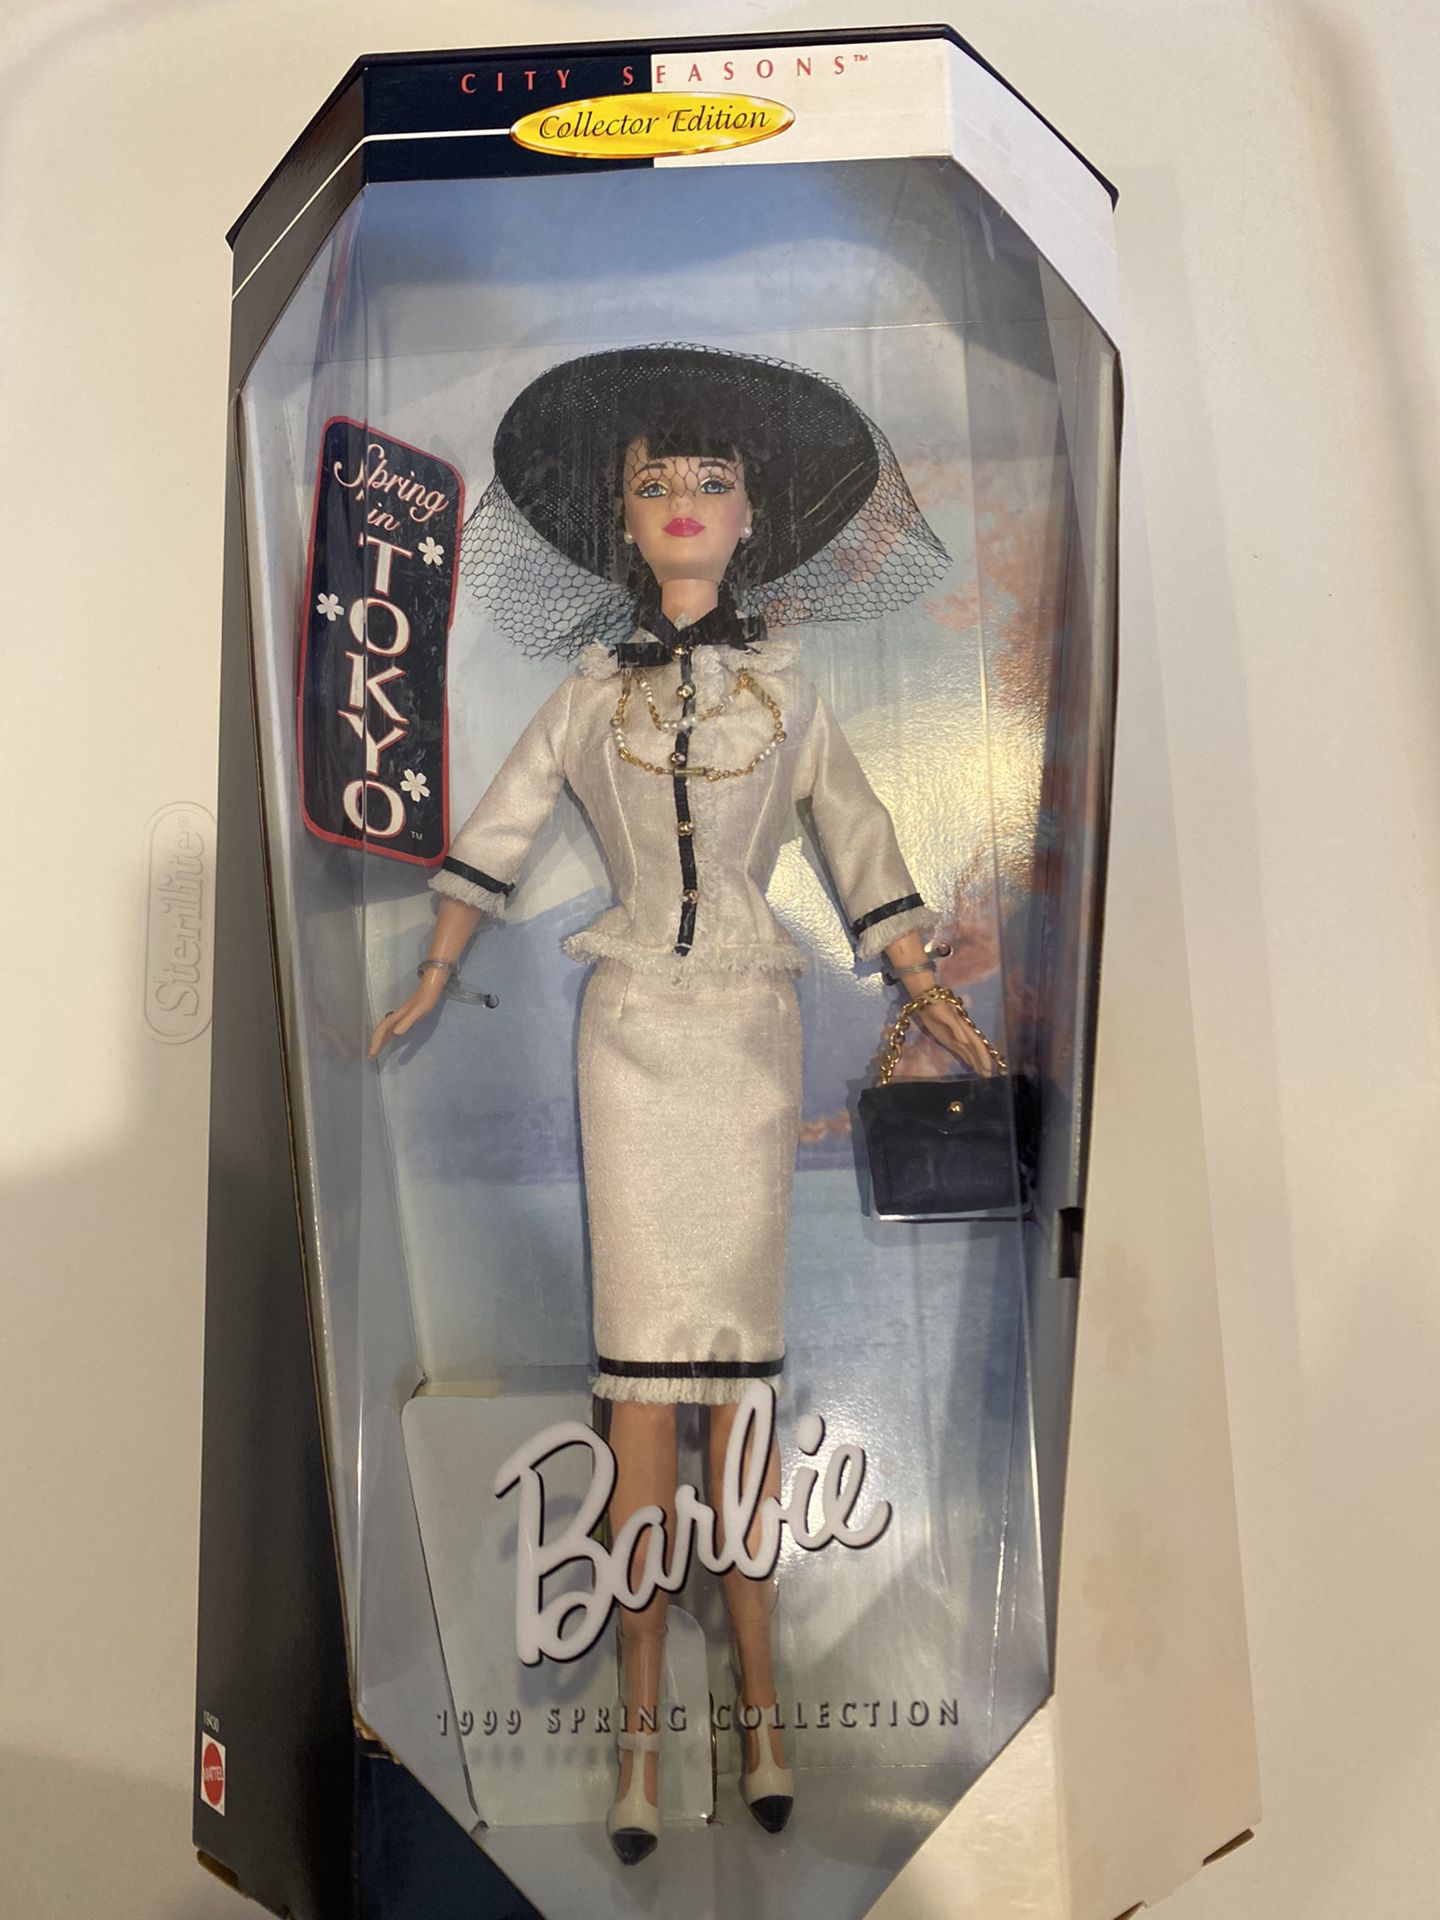 Barbie Tokyo 1999 Spring Collection City Seasons Collection Edition